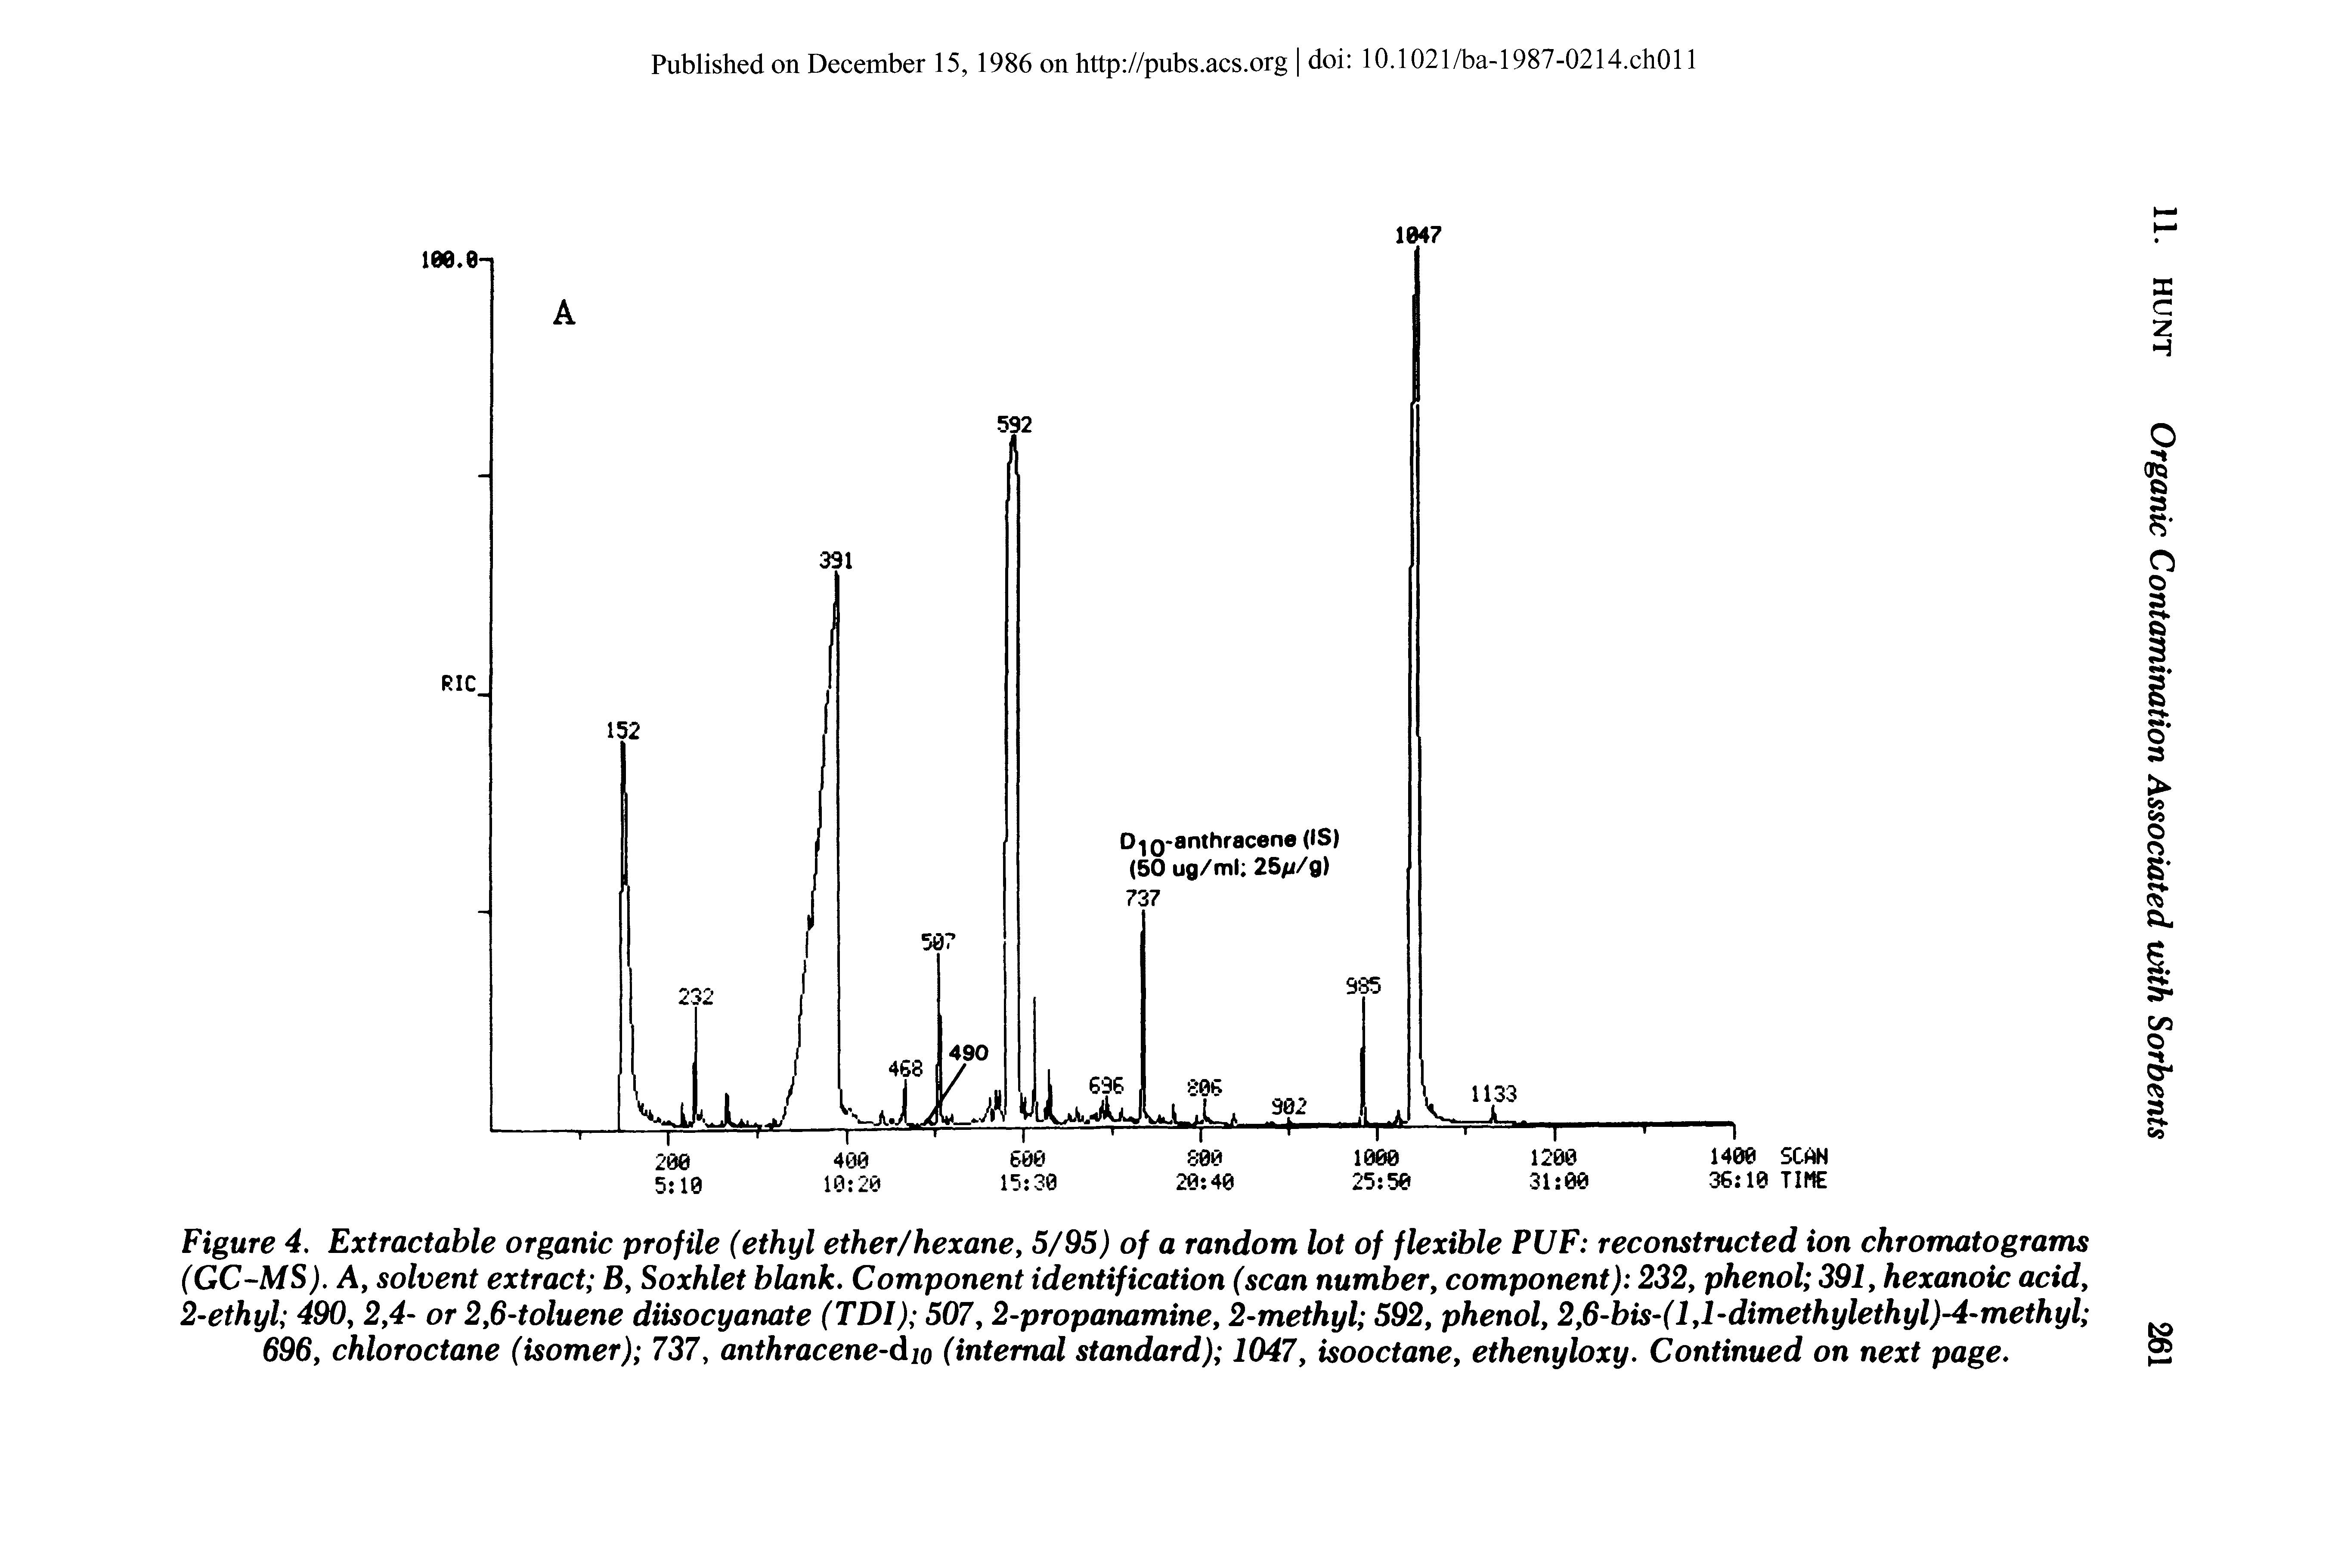 Figure 4, Extractable organic profile (ethyl ether/hexane, 5/95) of a random lot of flexible PUF reconstructed ion chromatograms (GC-MS). A, solvent extract B, Soxhlet blank. Component identification (scan number, component) 232, phenol 391, hexanoic acid, 2-ethyl 490, 2,4- or 2,6-toluene diisocyanate (TDI) 507,2-propanamine, 2-methyl 592, phenol, 2,6-bis-(l,l-dimethylethyl)-4-methyl 696, chloroctane (isomer) 737, anthracene-dw (internal standard) 1047, isooctane, ethenyloxy. Continued on next page.